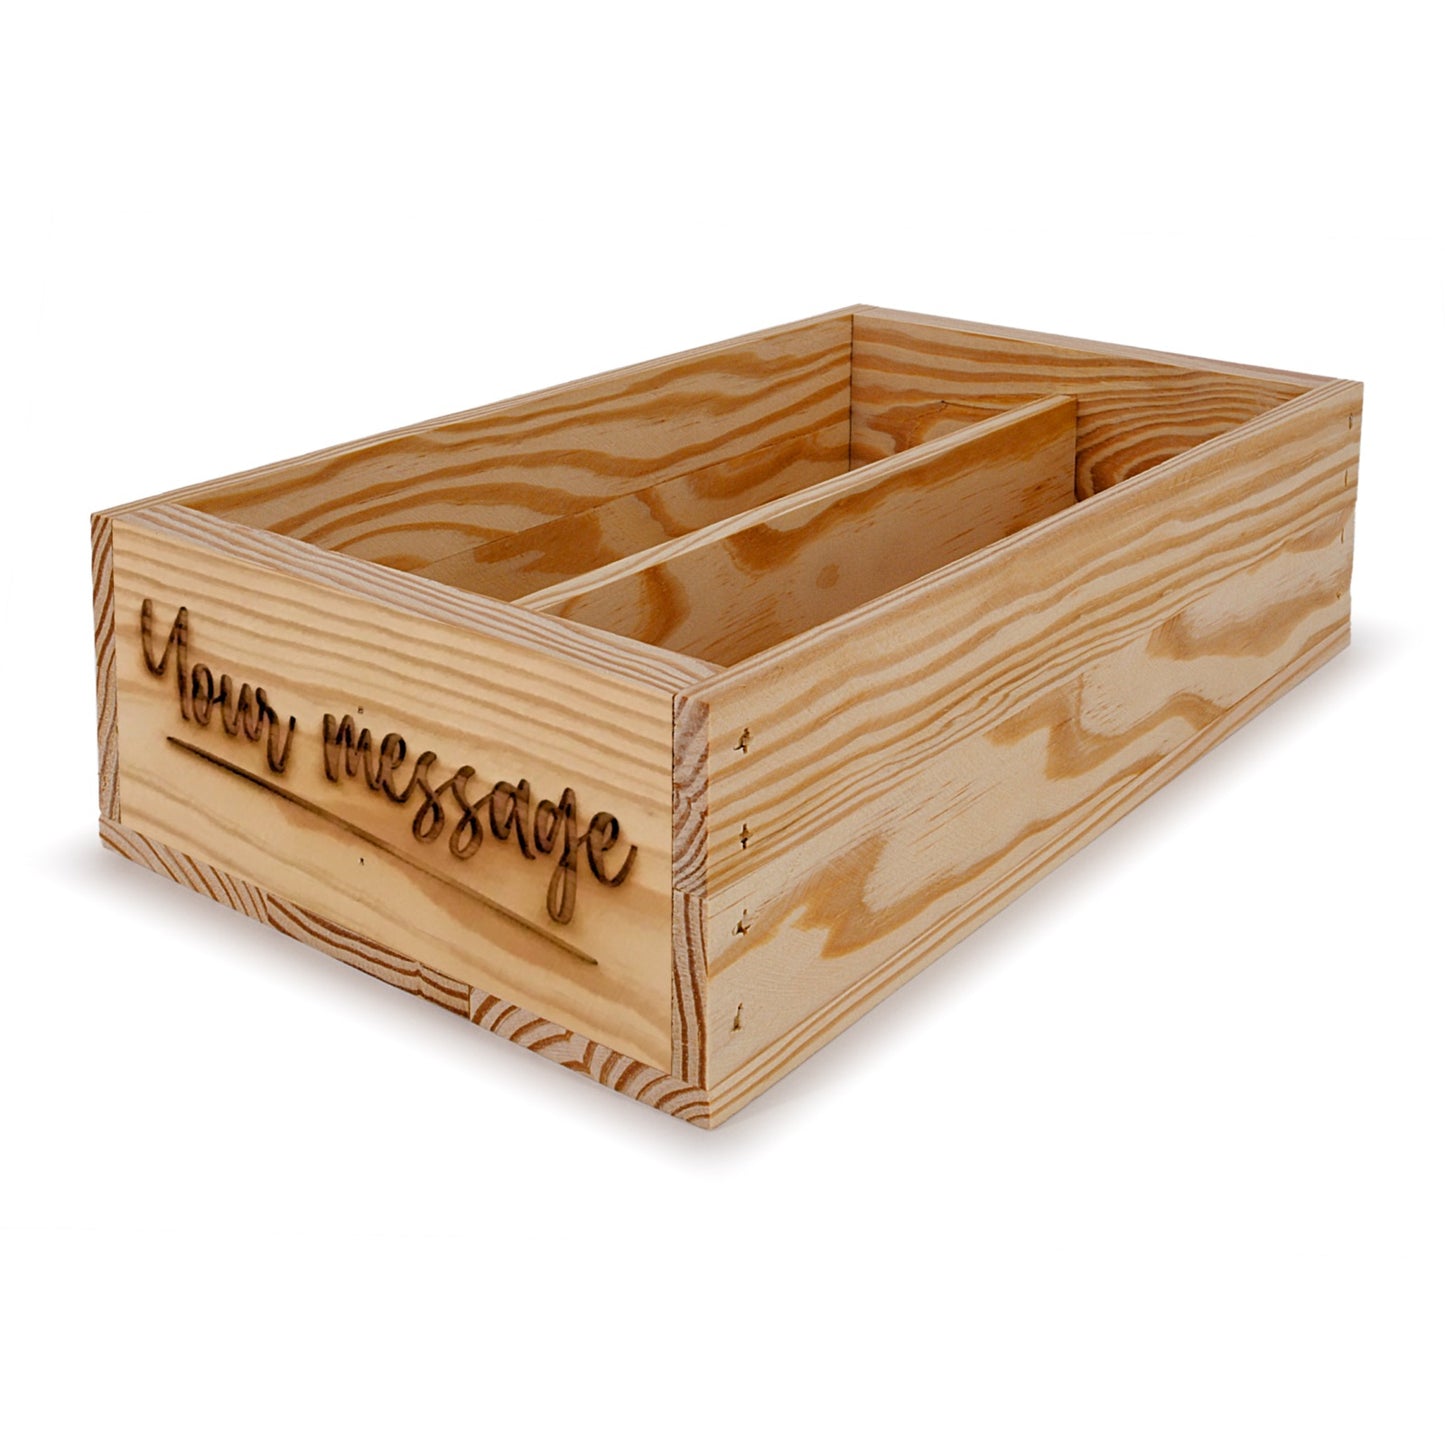 2 Bottle wine crate with custom message 13x7.5x3.5